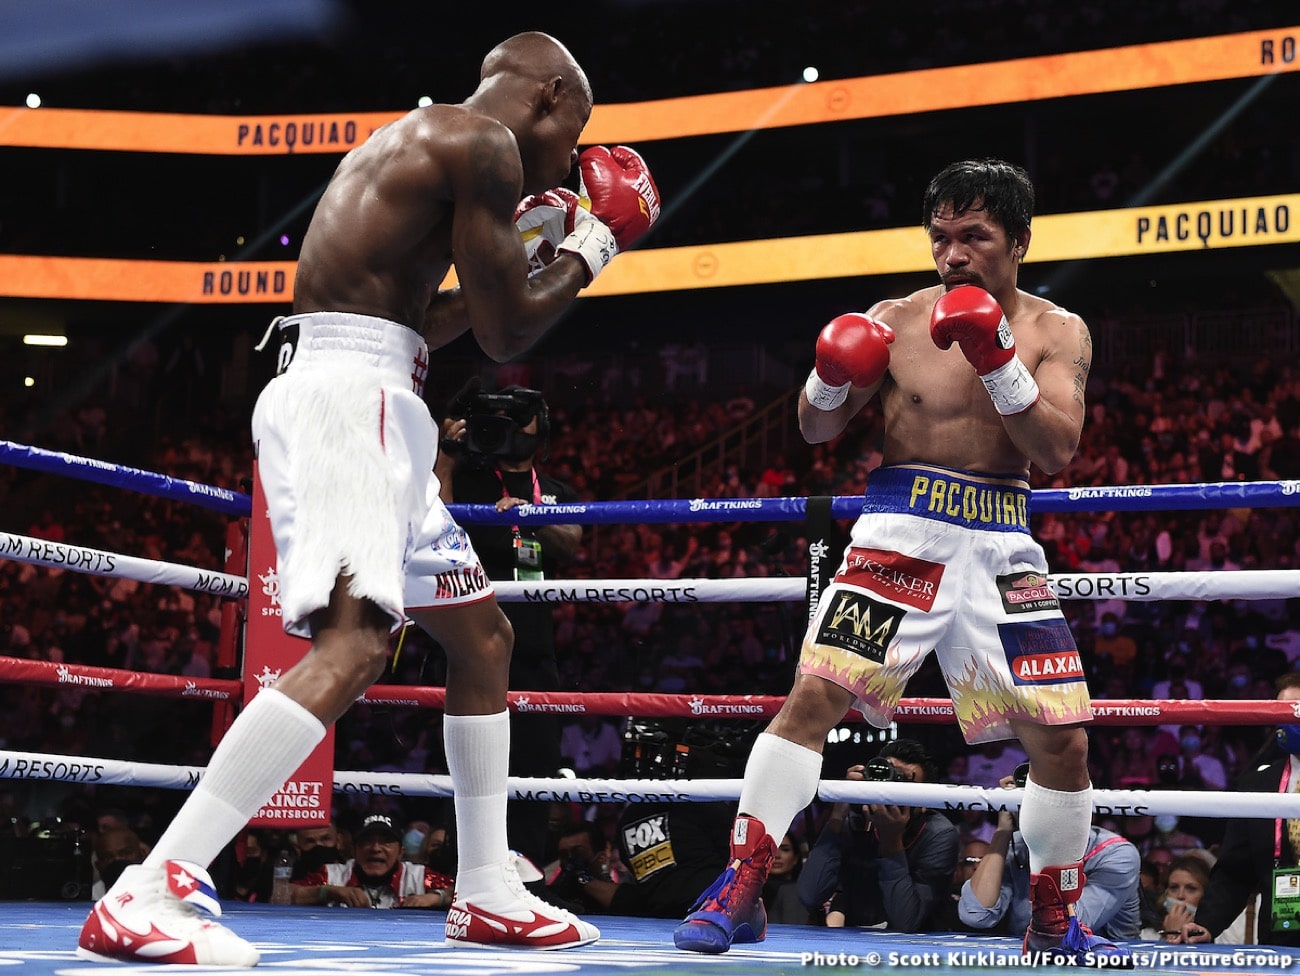 Manny Pacquiao boxing photo and news image